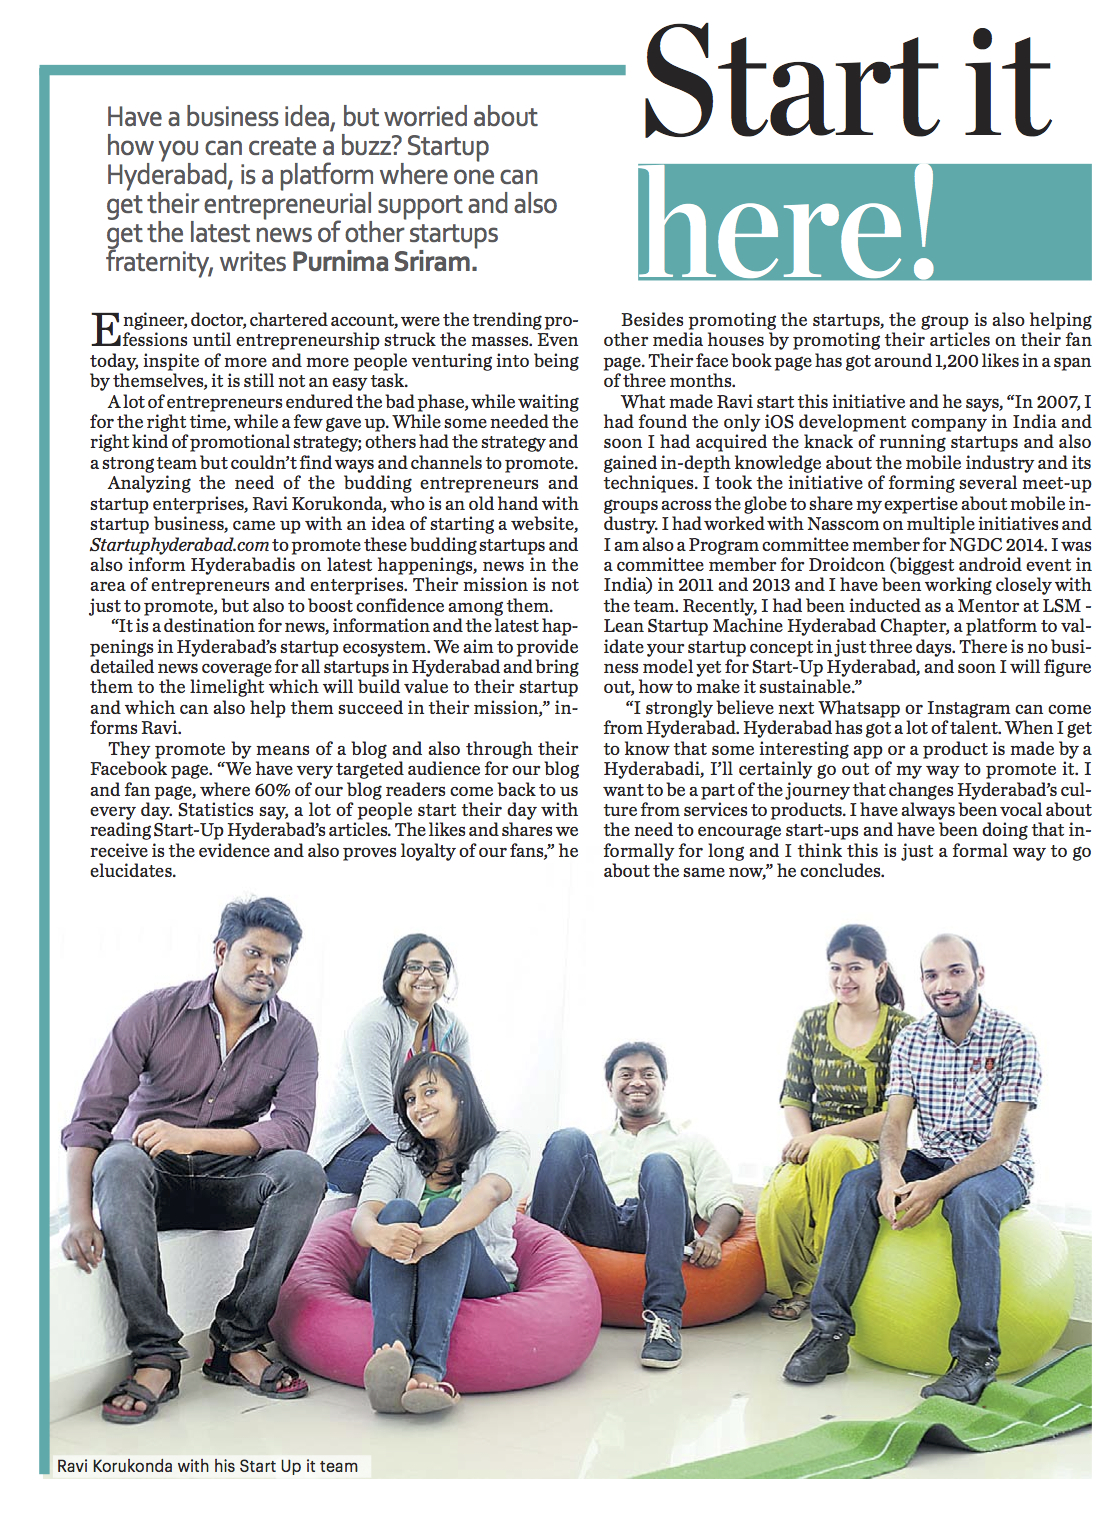 Start-Up Hyderabad featured in Metro India